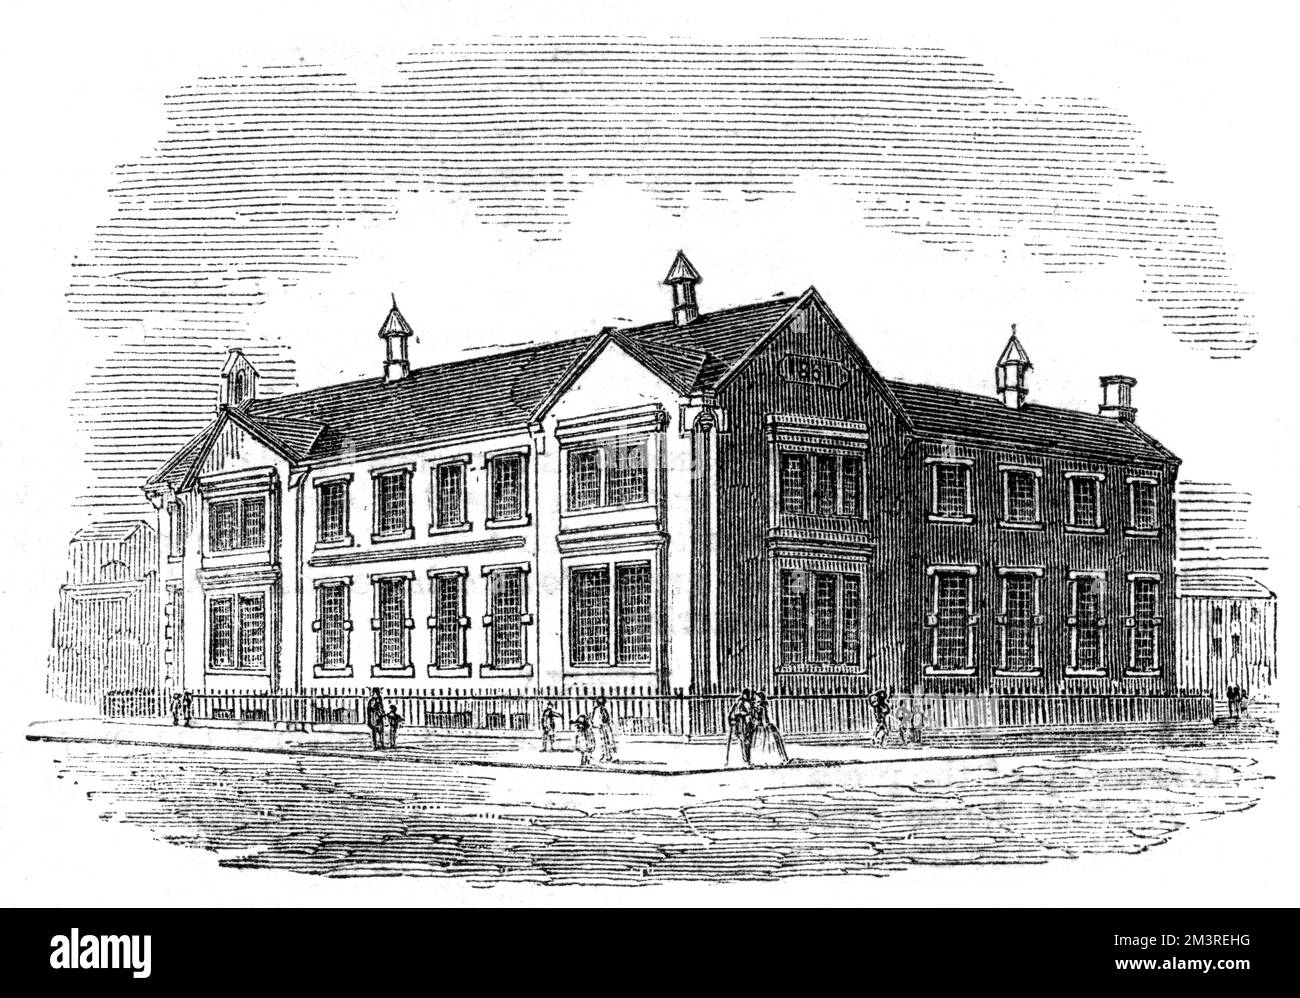 Industrial schools and working men's free schoolroom church at Scotland Road, Kirkdale, Liverpool. The building was intended for use not only as an industrial ragged school where children of the very poorest would receive elementary instruction, but also as a place where boys could be taught the rudiments of useful occupations for later in life.     Date: 1850 Stock Photo